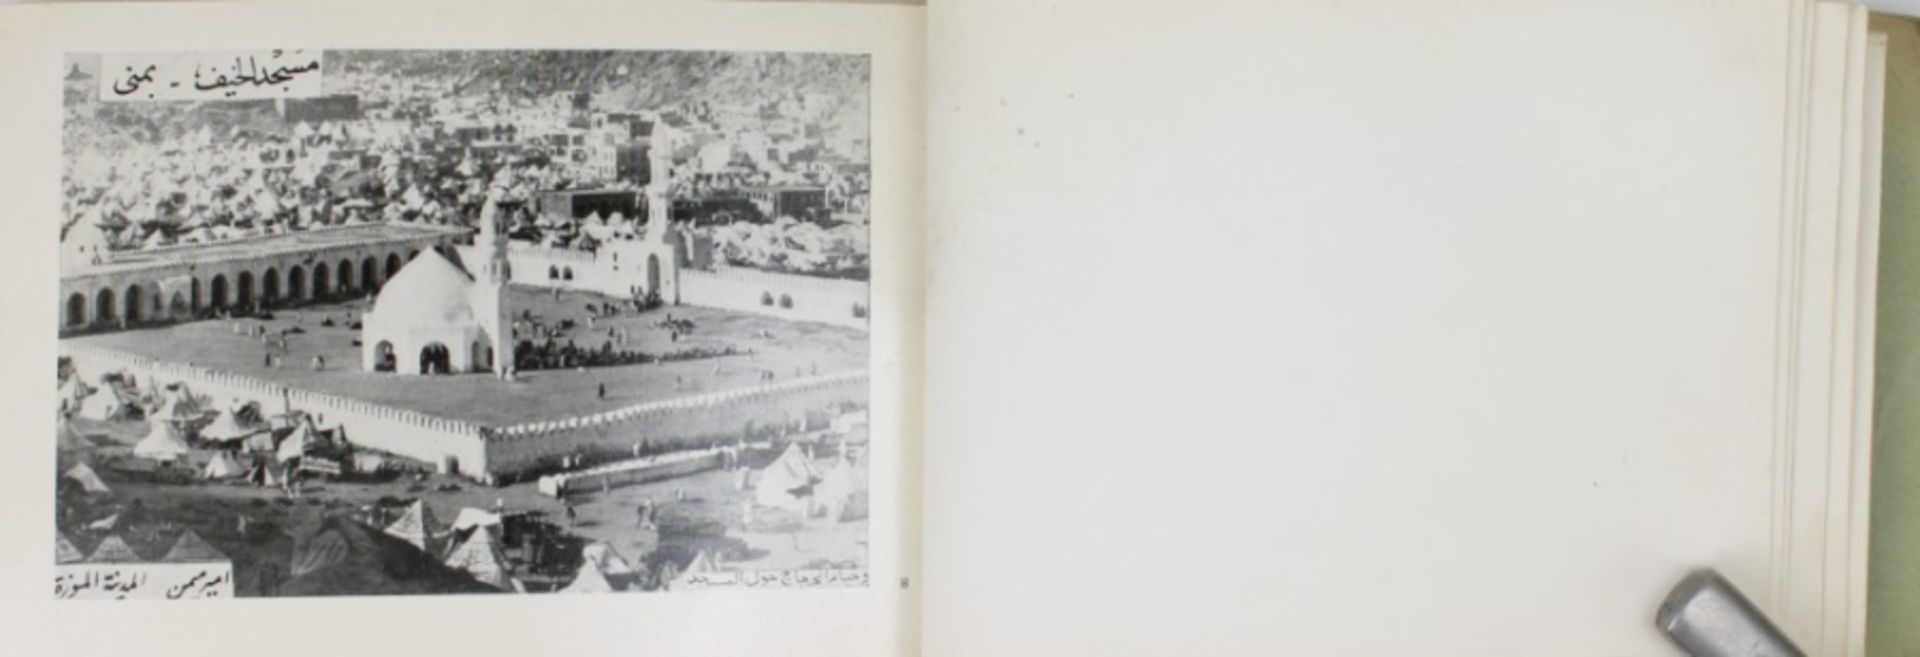 1930 Album with photographs of Mecca - Image 7 of 24